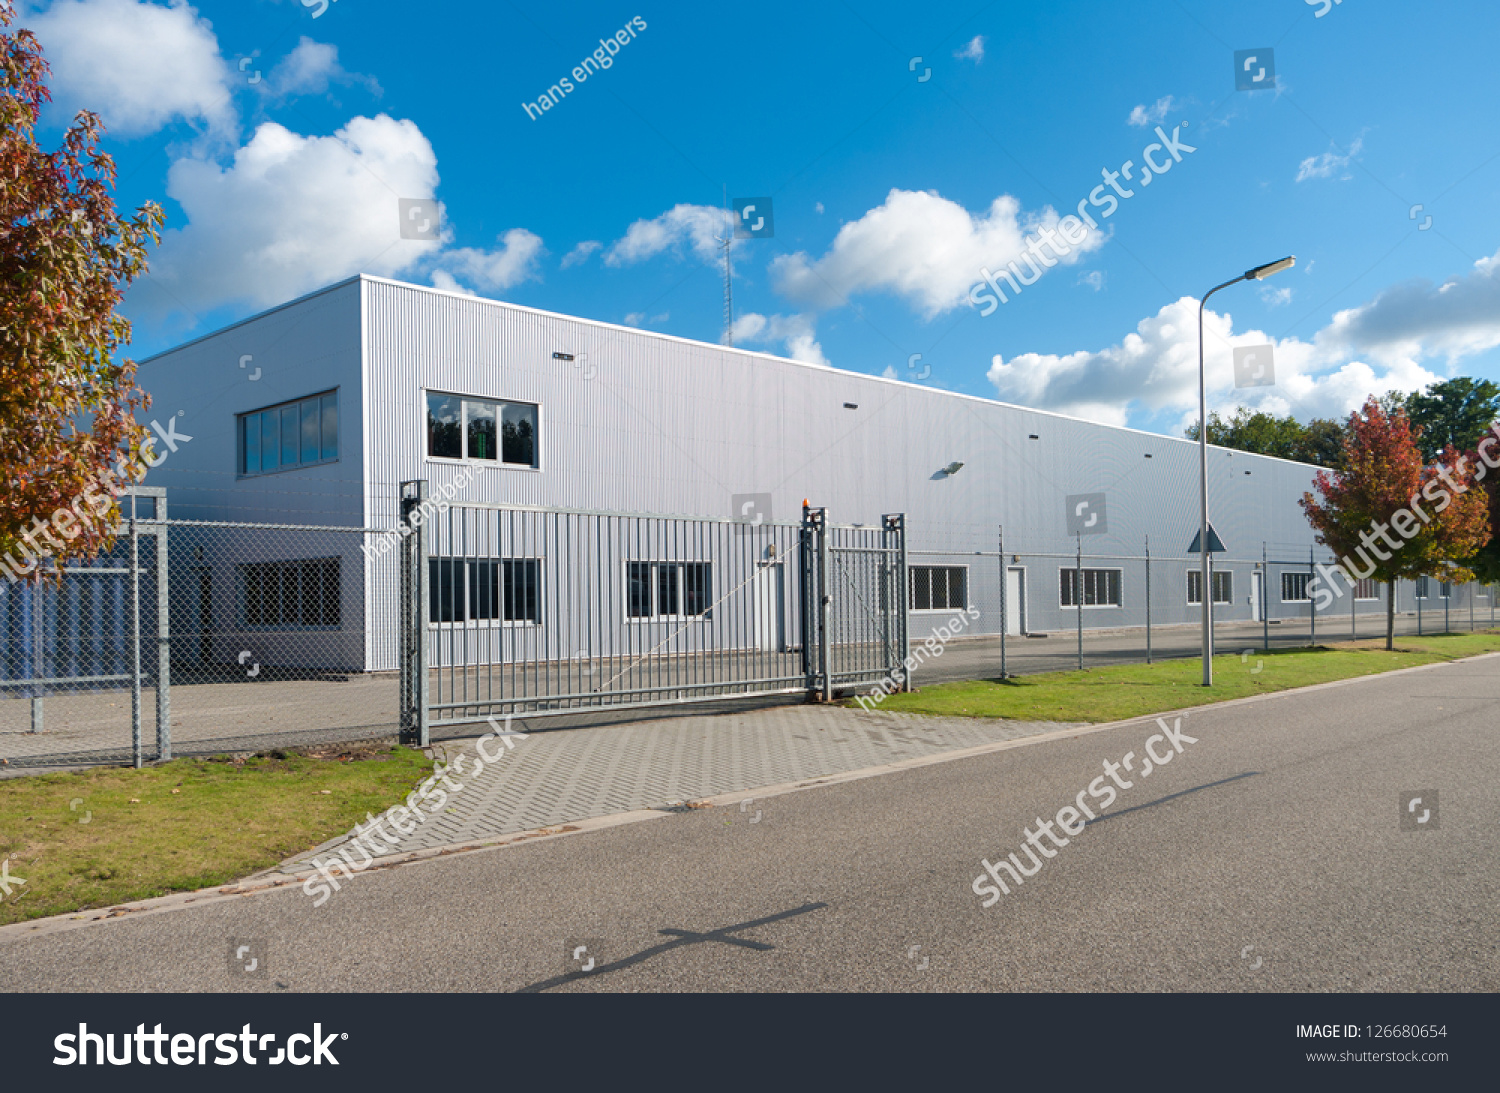 Modern Exterior Industrial Building Surrounded By Stock Photo 126680654 - Shutterstock1500 x 1093